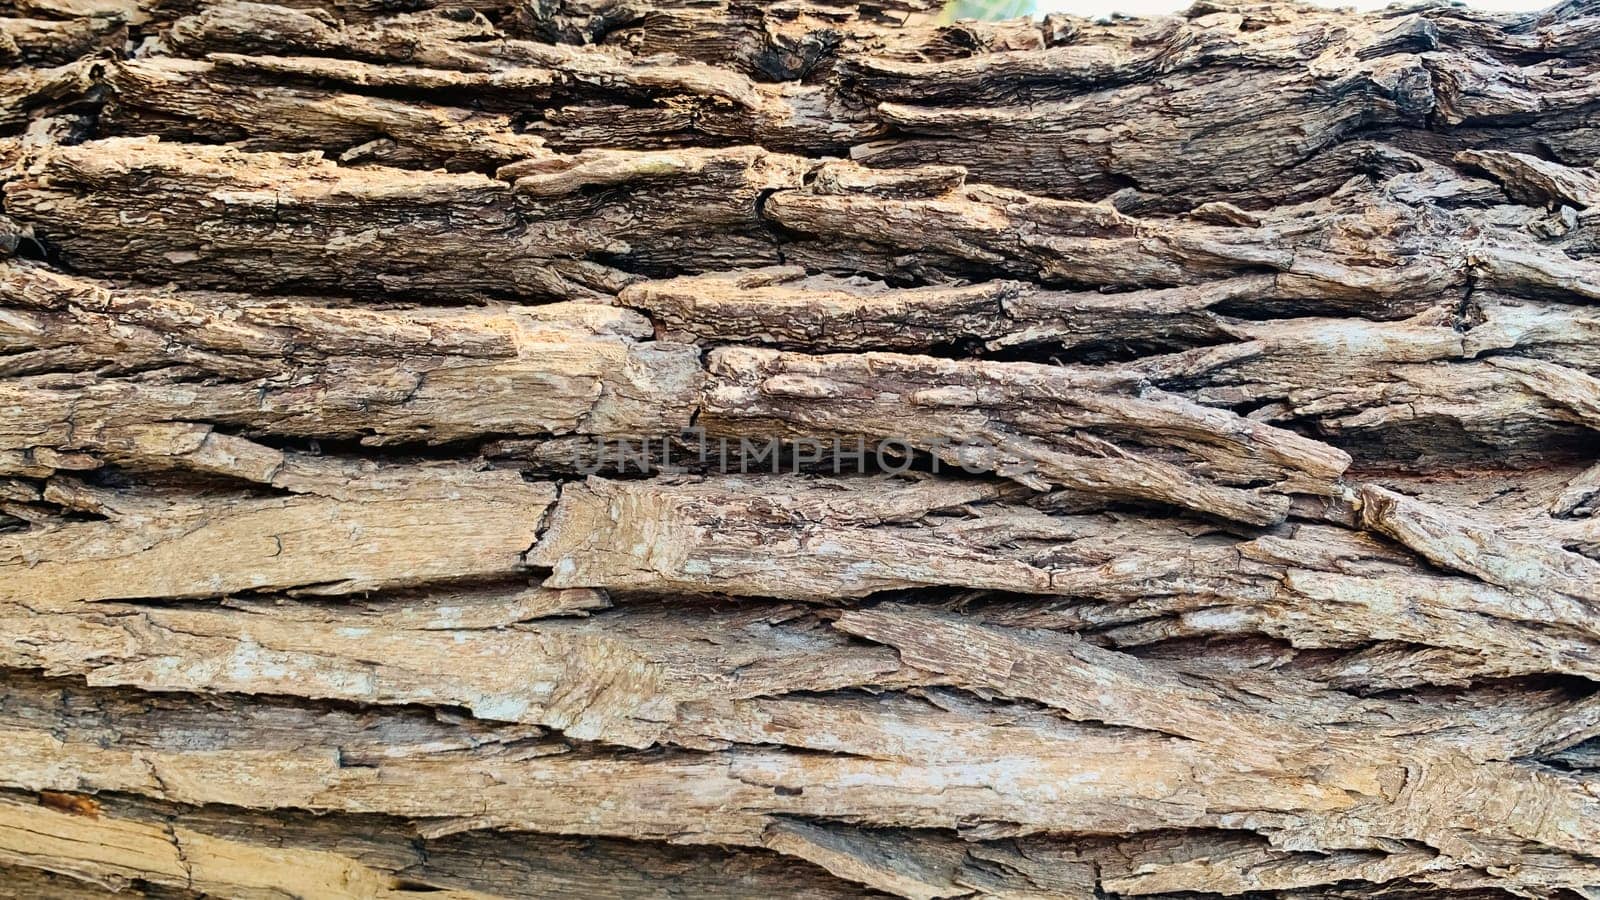 Bark pattern is seamless texture from tree. For background wood work, Bark of brown hardwood, thick bark hardwood, residential house wood. nature, trunk, tree, bark, hardwood, trunk, tree, trunk